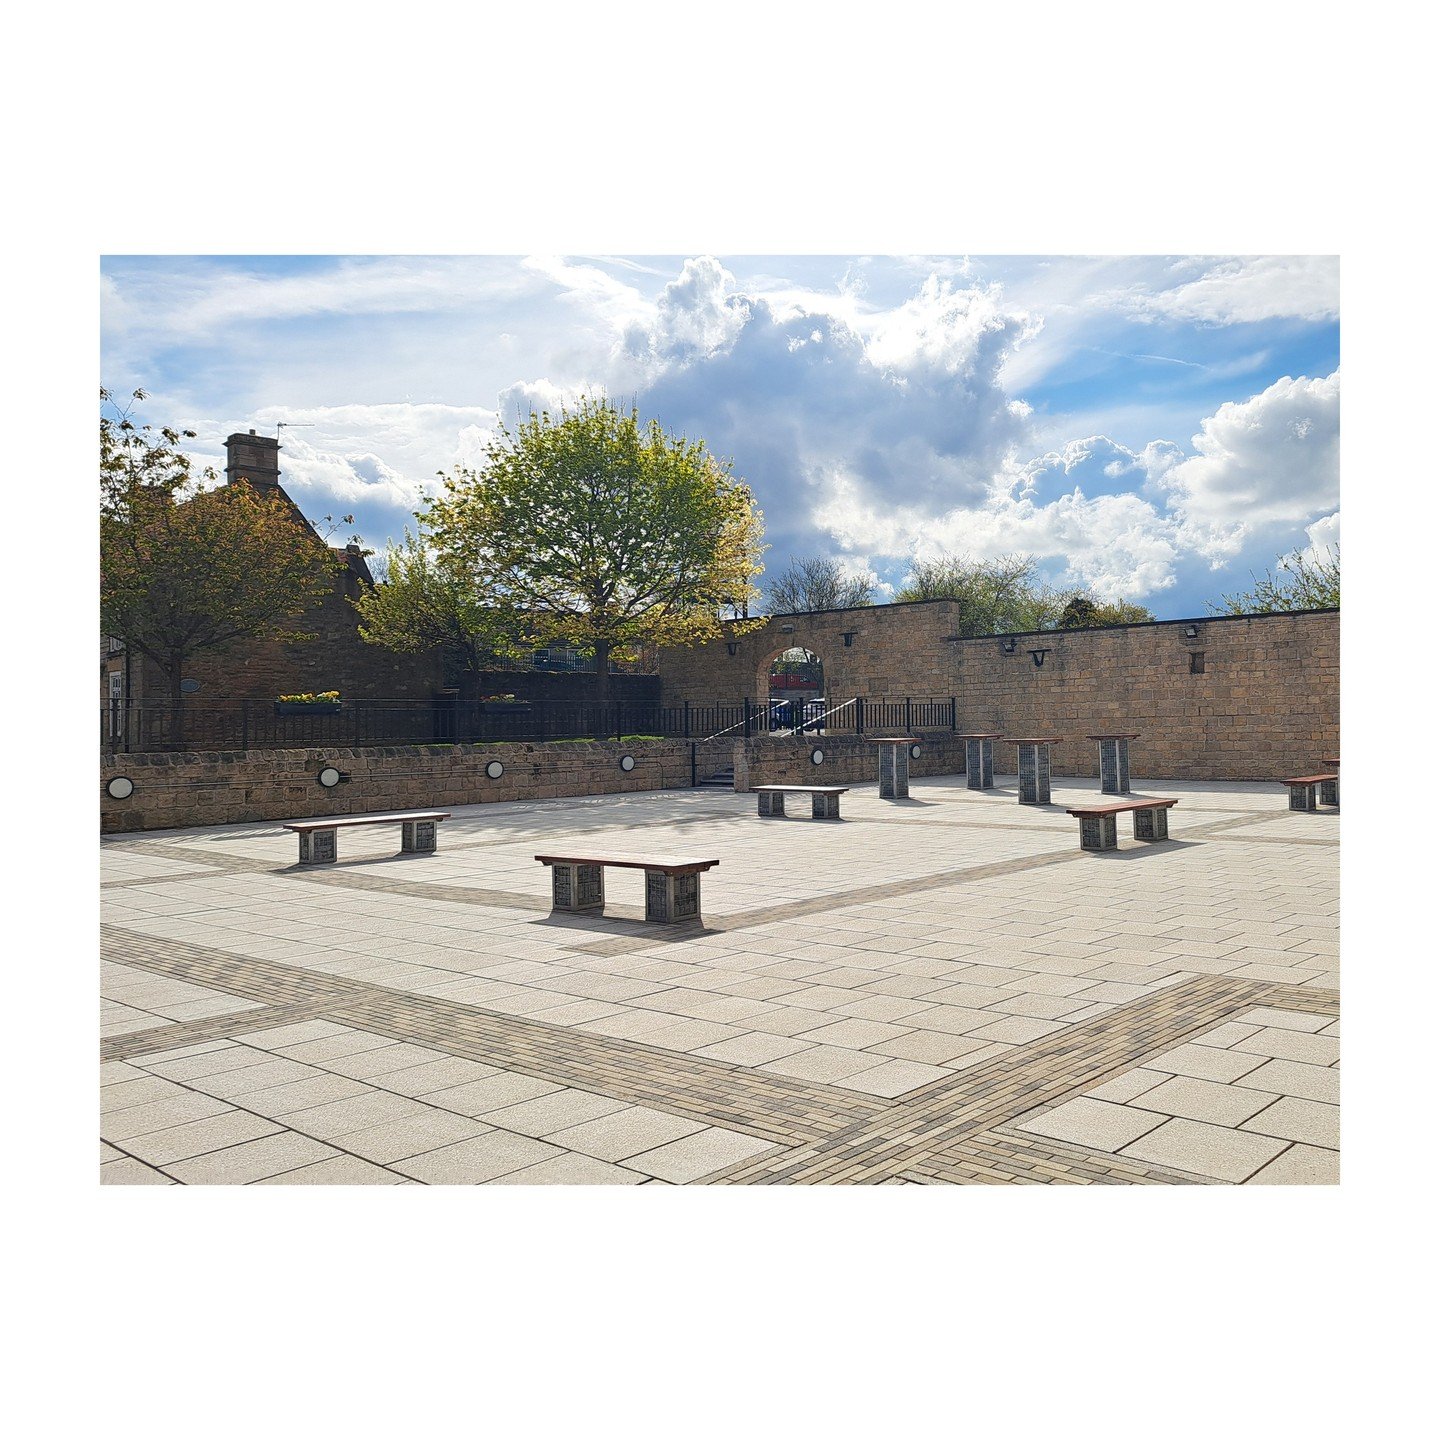 Nice way to end the week with the handover of Bolsover Town Hall Square to Old Bolsover Town Council. The square is a key space in Bolsover with regular events such as the Artisan Fairs, Food Festivals and the Winter Festival held in it every year. H